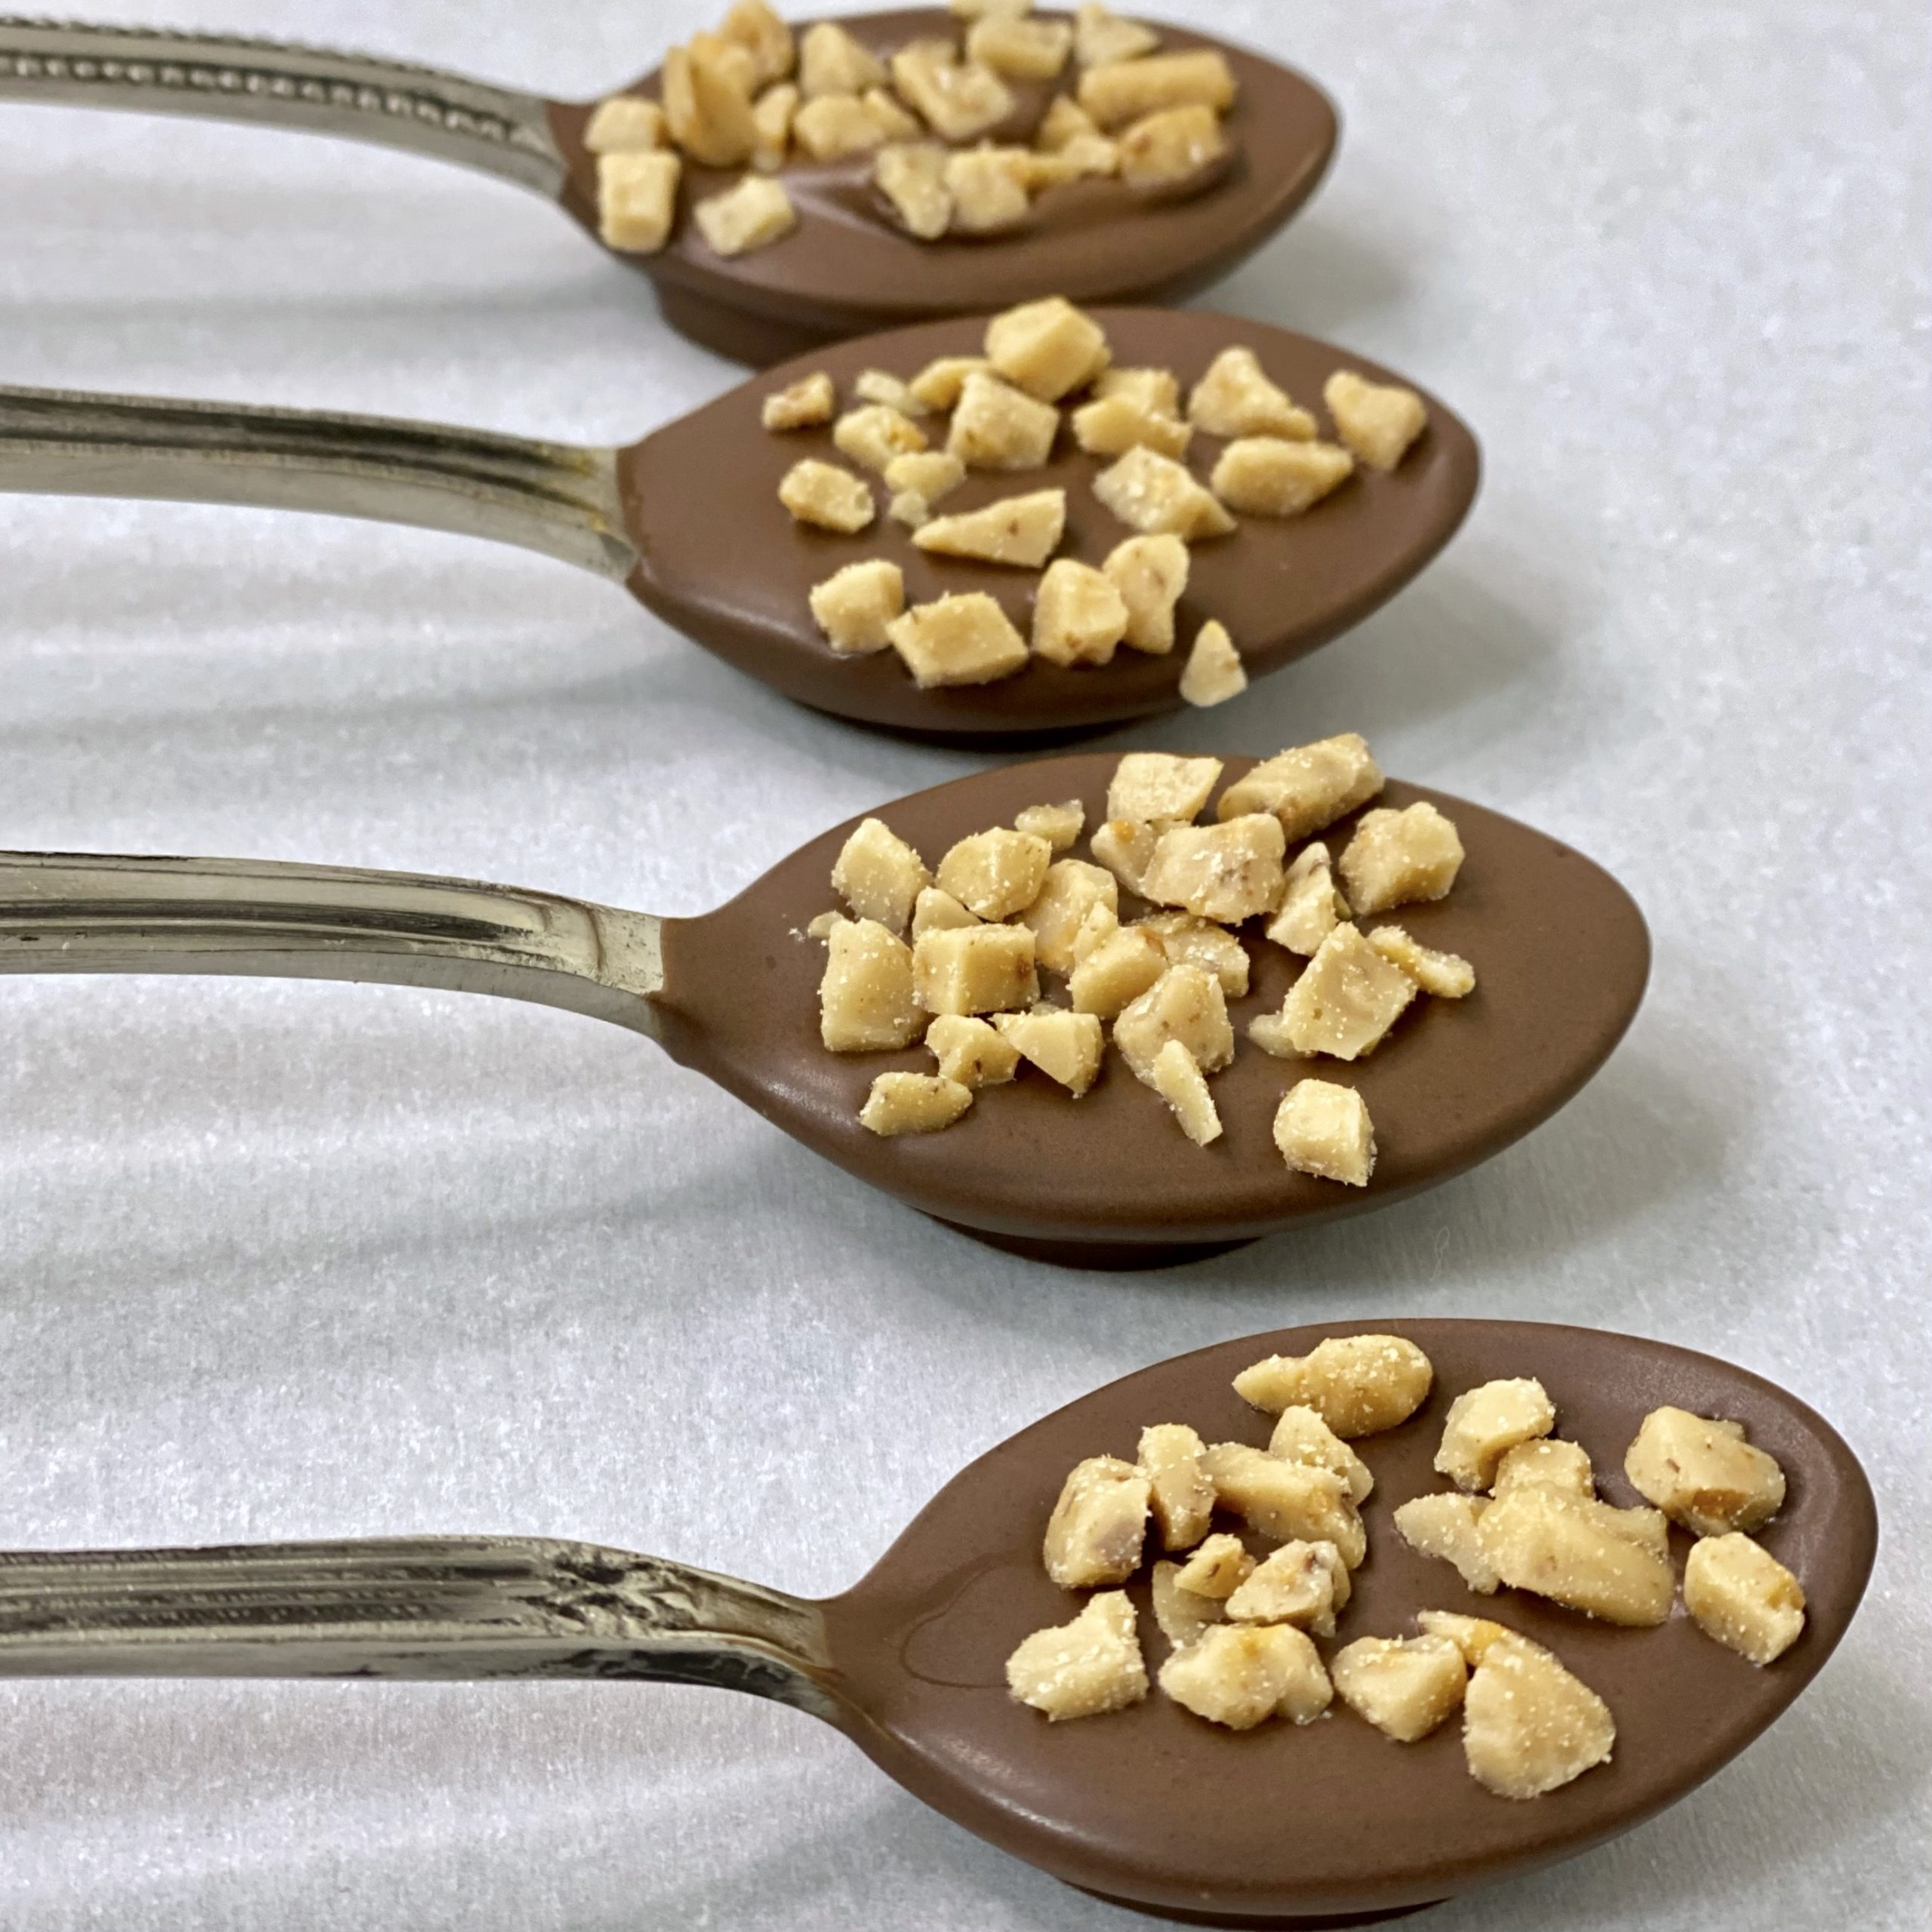 Chocolate dipped spoons with toffee bits on them.